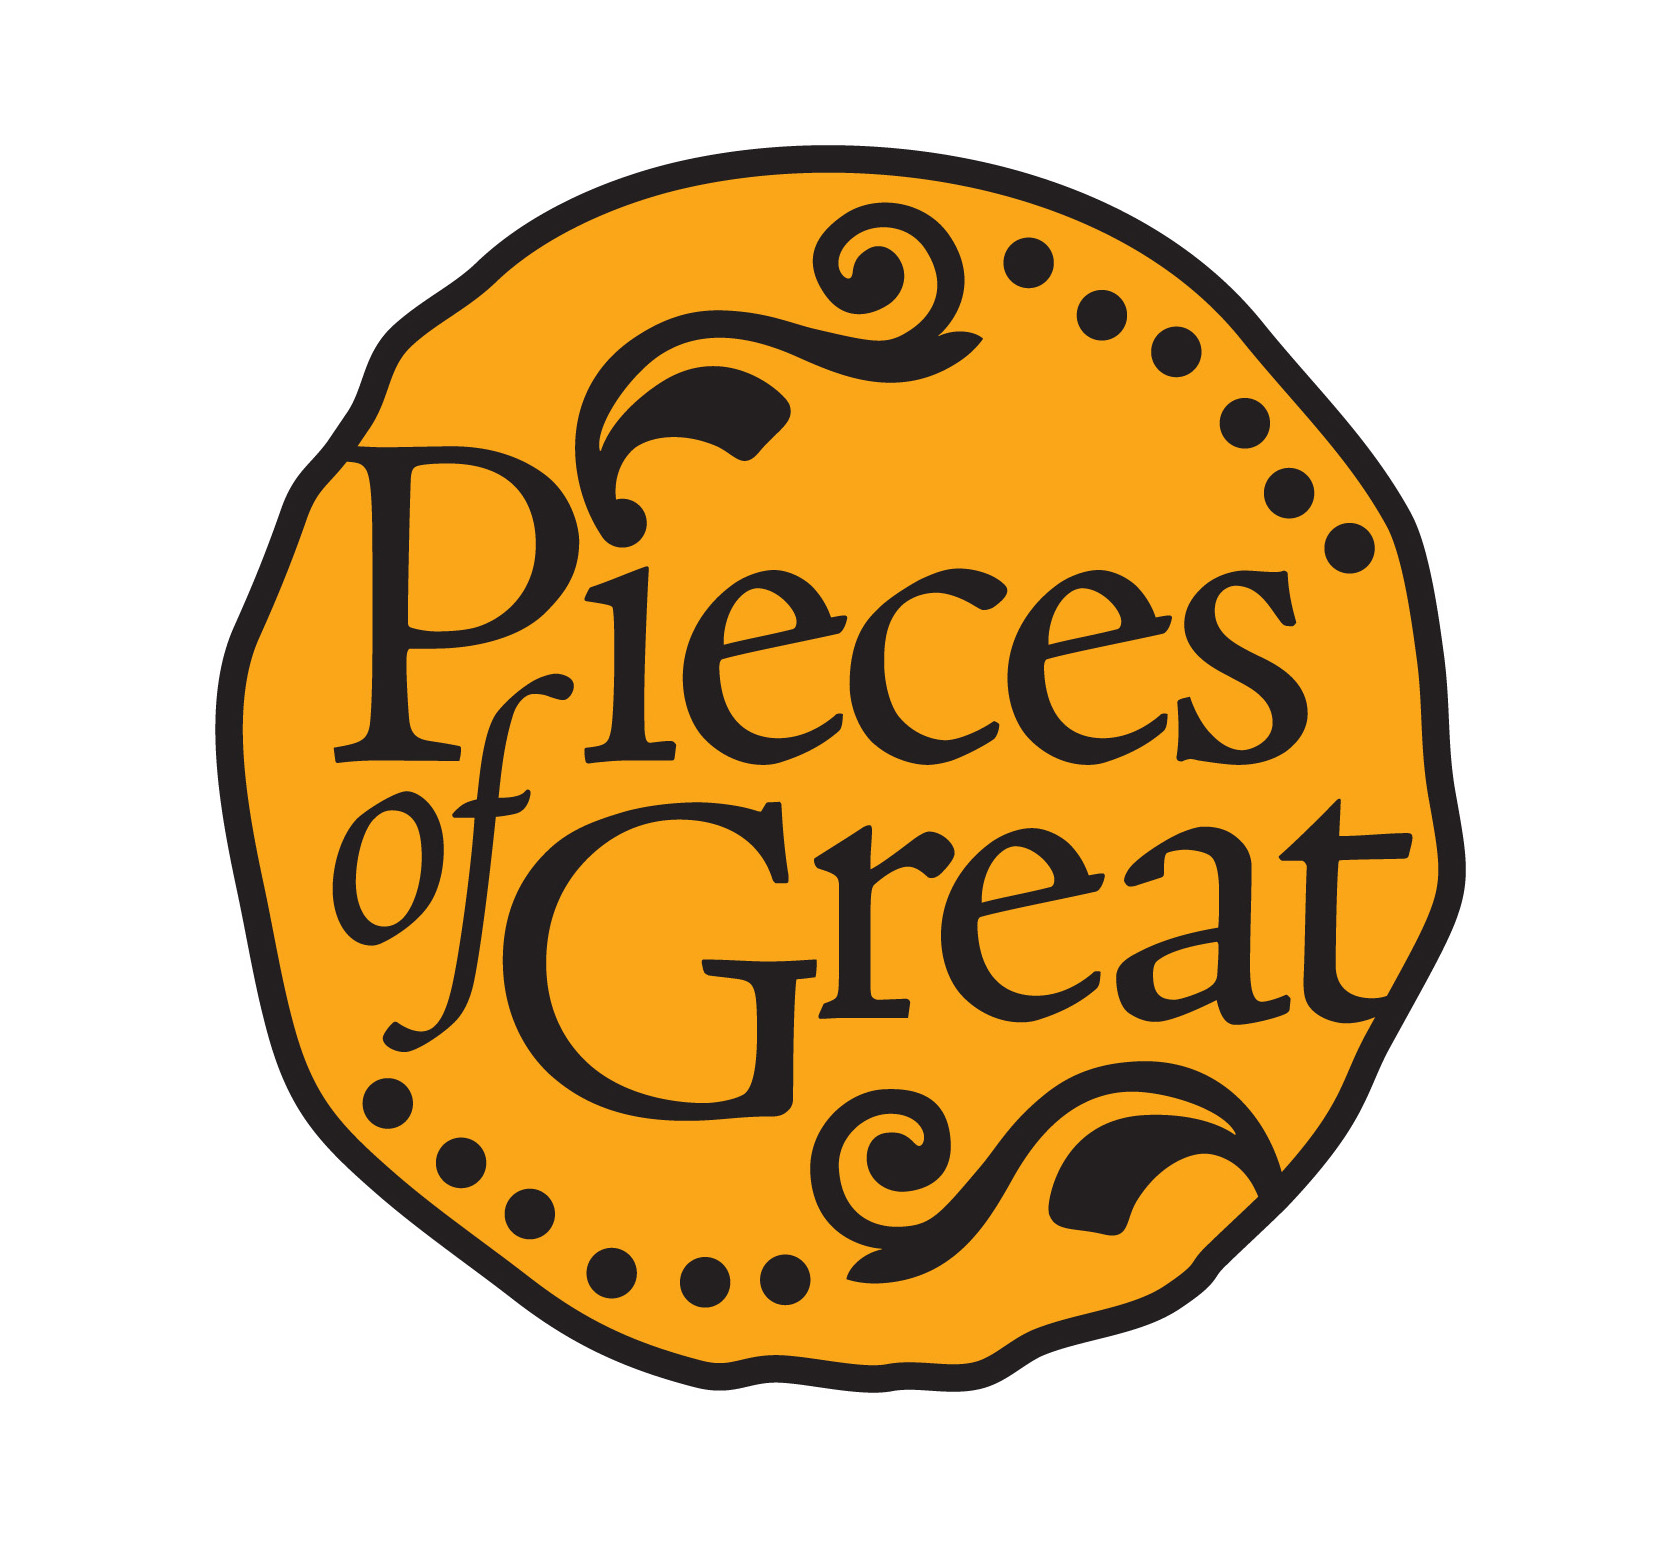 Pieces of Great